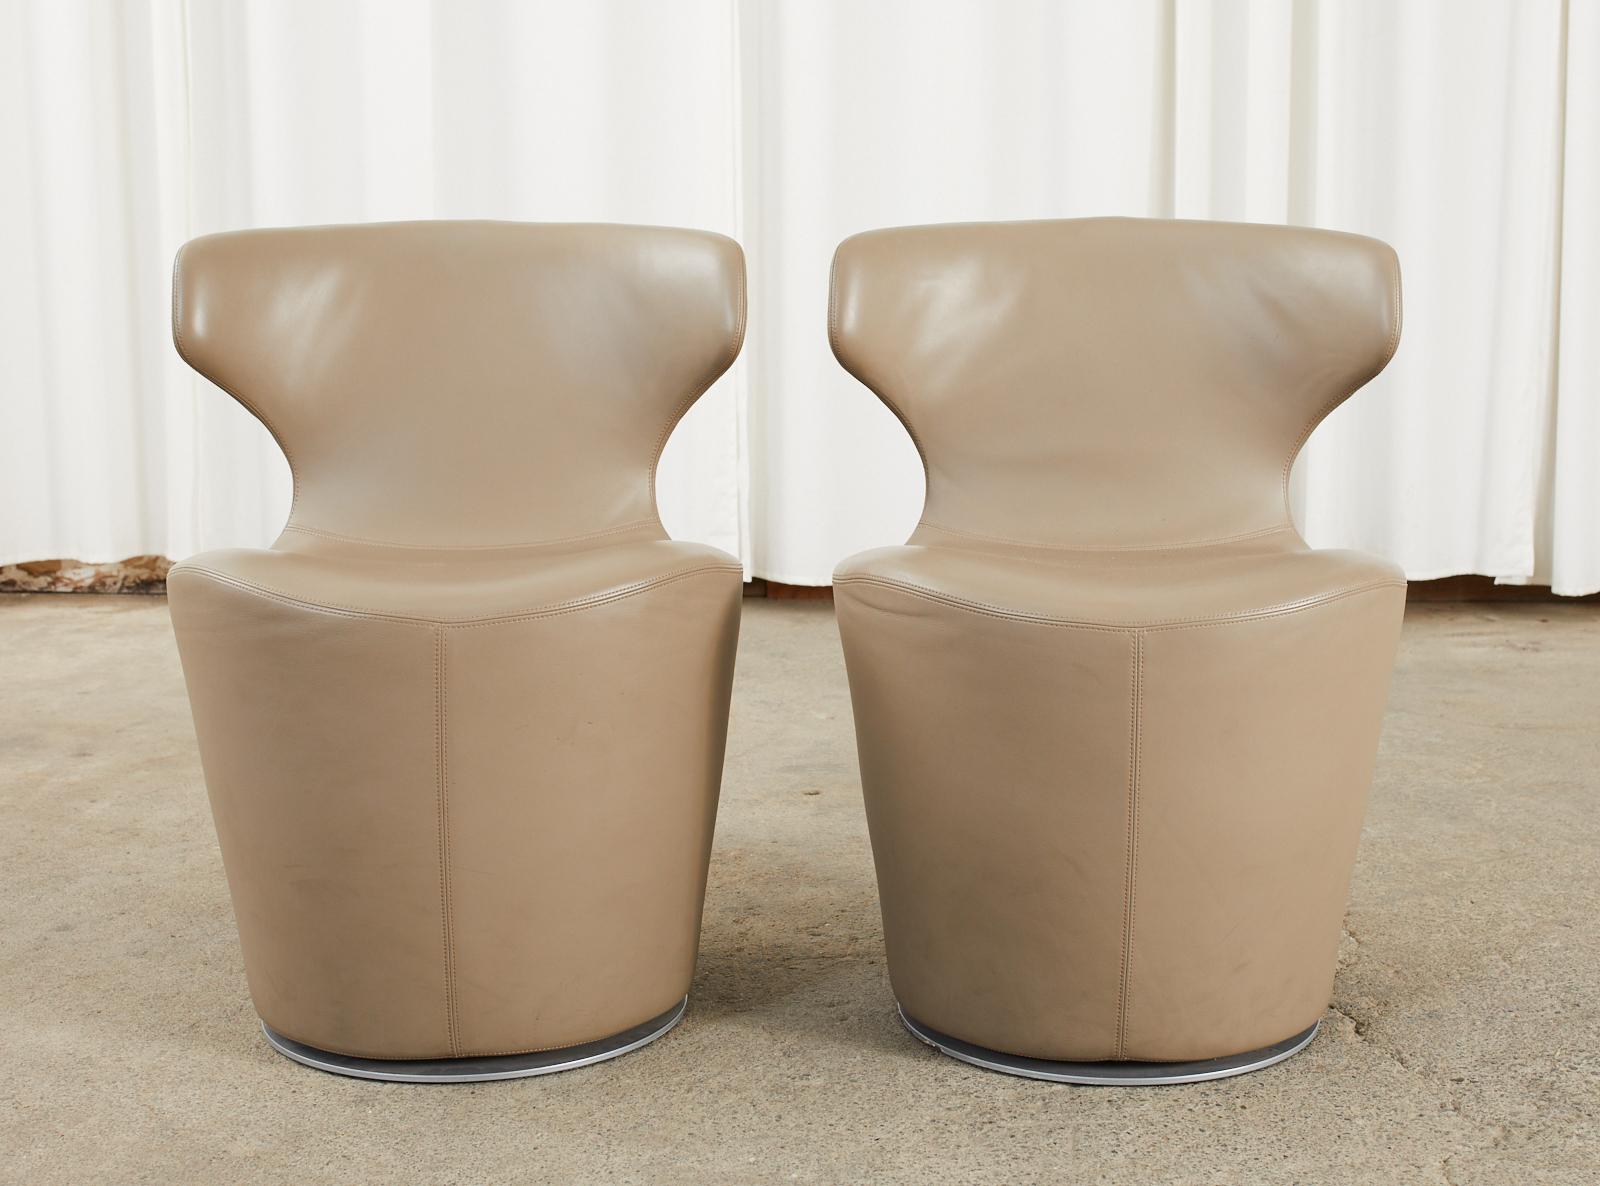 Sleek pair of leather mini Papilio chairs designed by Naoto Fukusawa for B & B Italia. Amazing swivel chairs featuring a steel frame covered in fine Italian leather in an oyster tone with a steel swivel base. Iconic style with graceful lines and